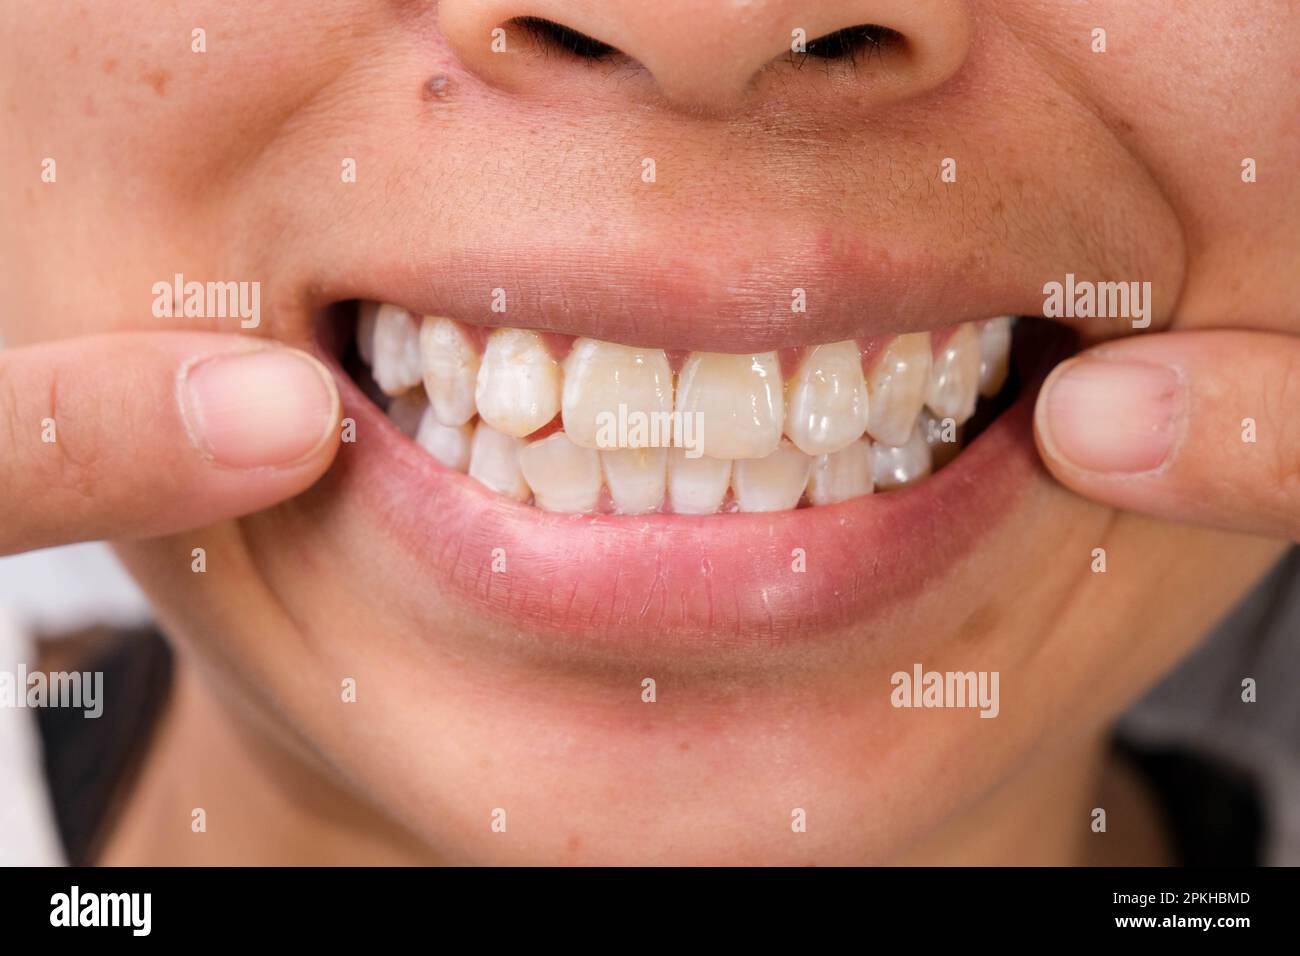 Close-up of a smiling woman's teeth revealing white spots and plaque on the tooth surface. Oral care and Dental concept. Stock Photo